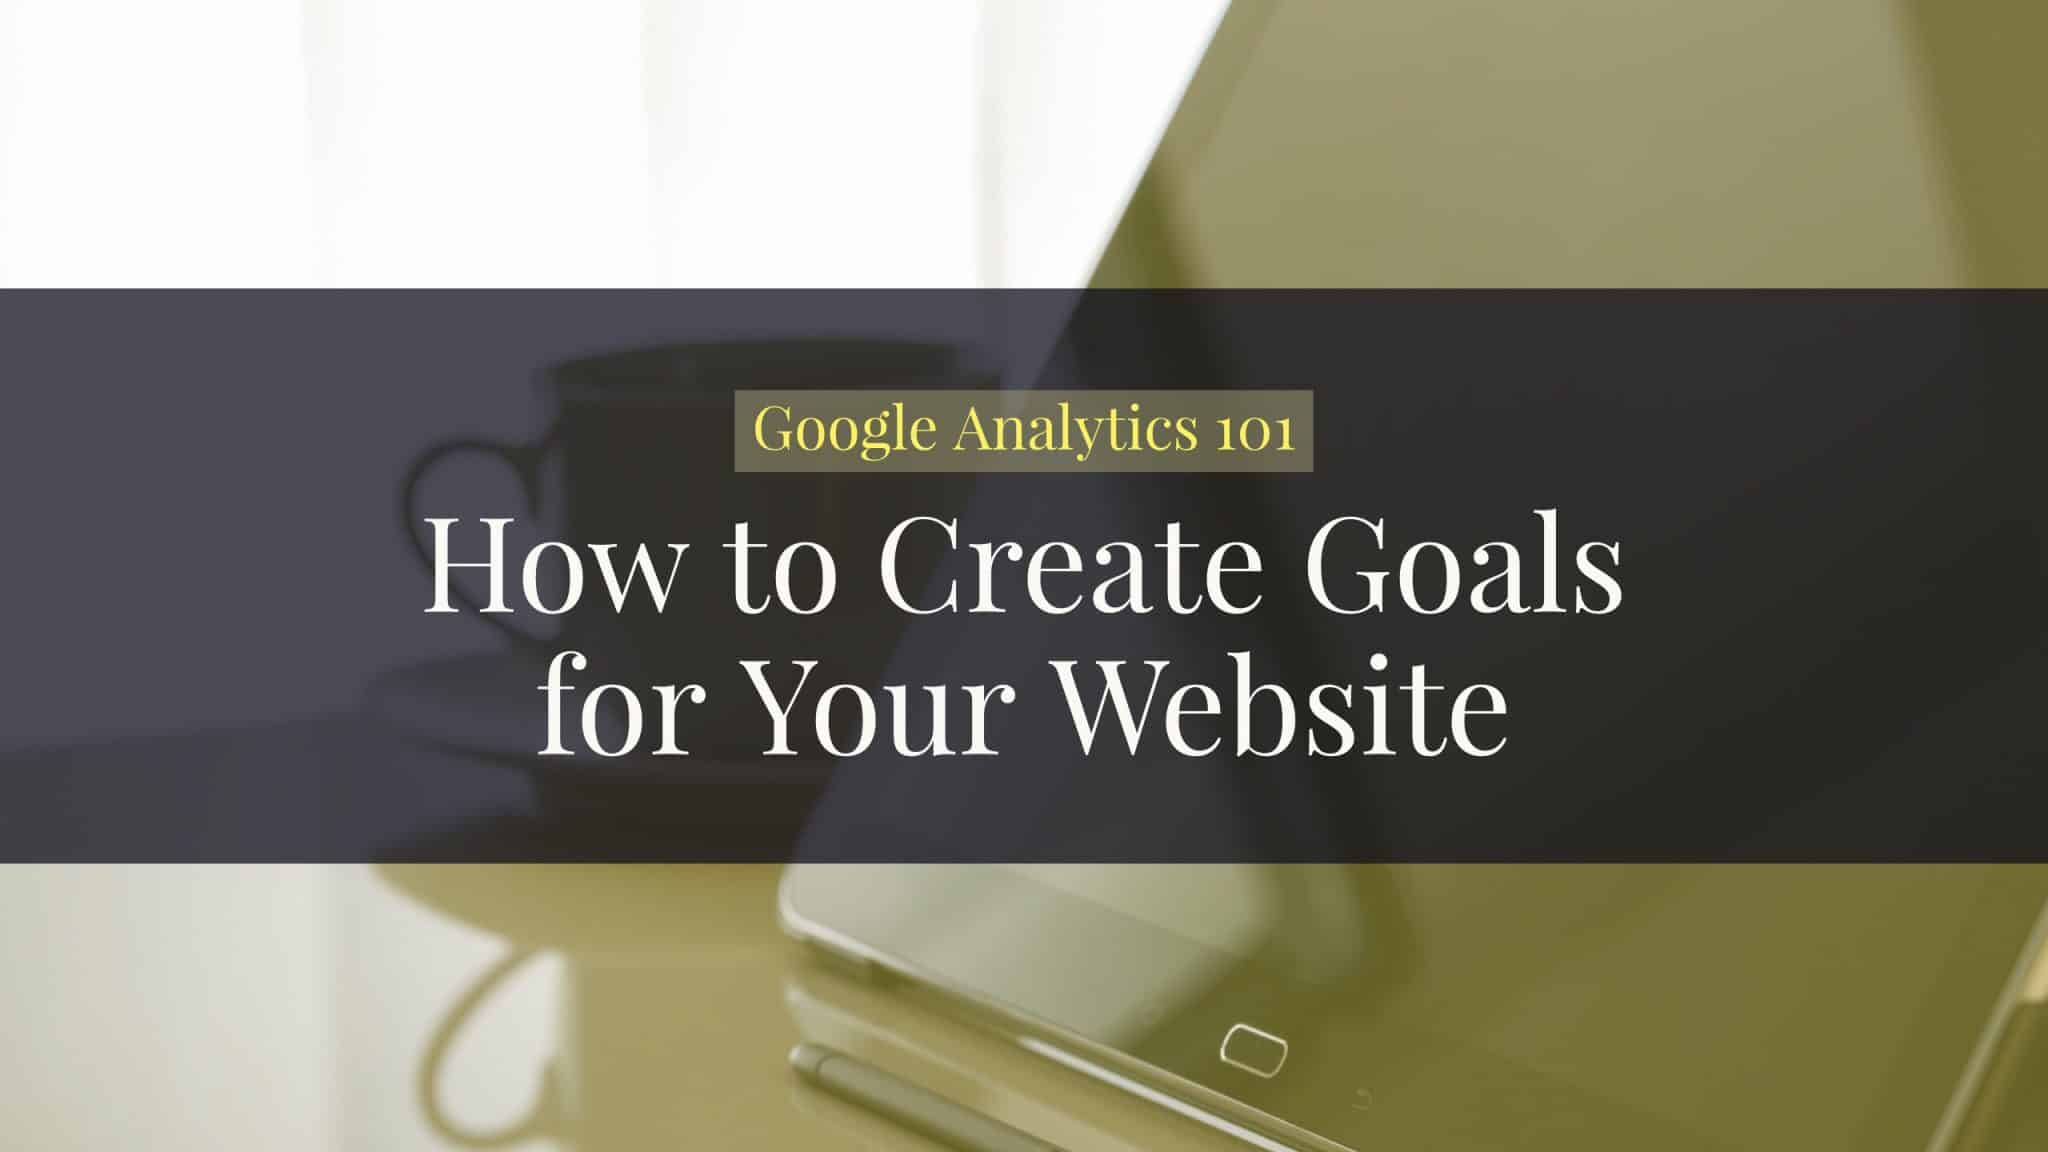 Google Analytics 101: How to Create Goals for Your Website